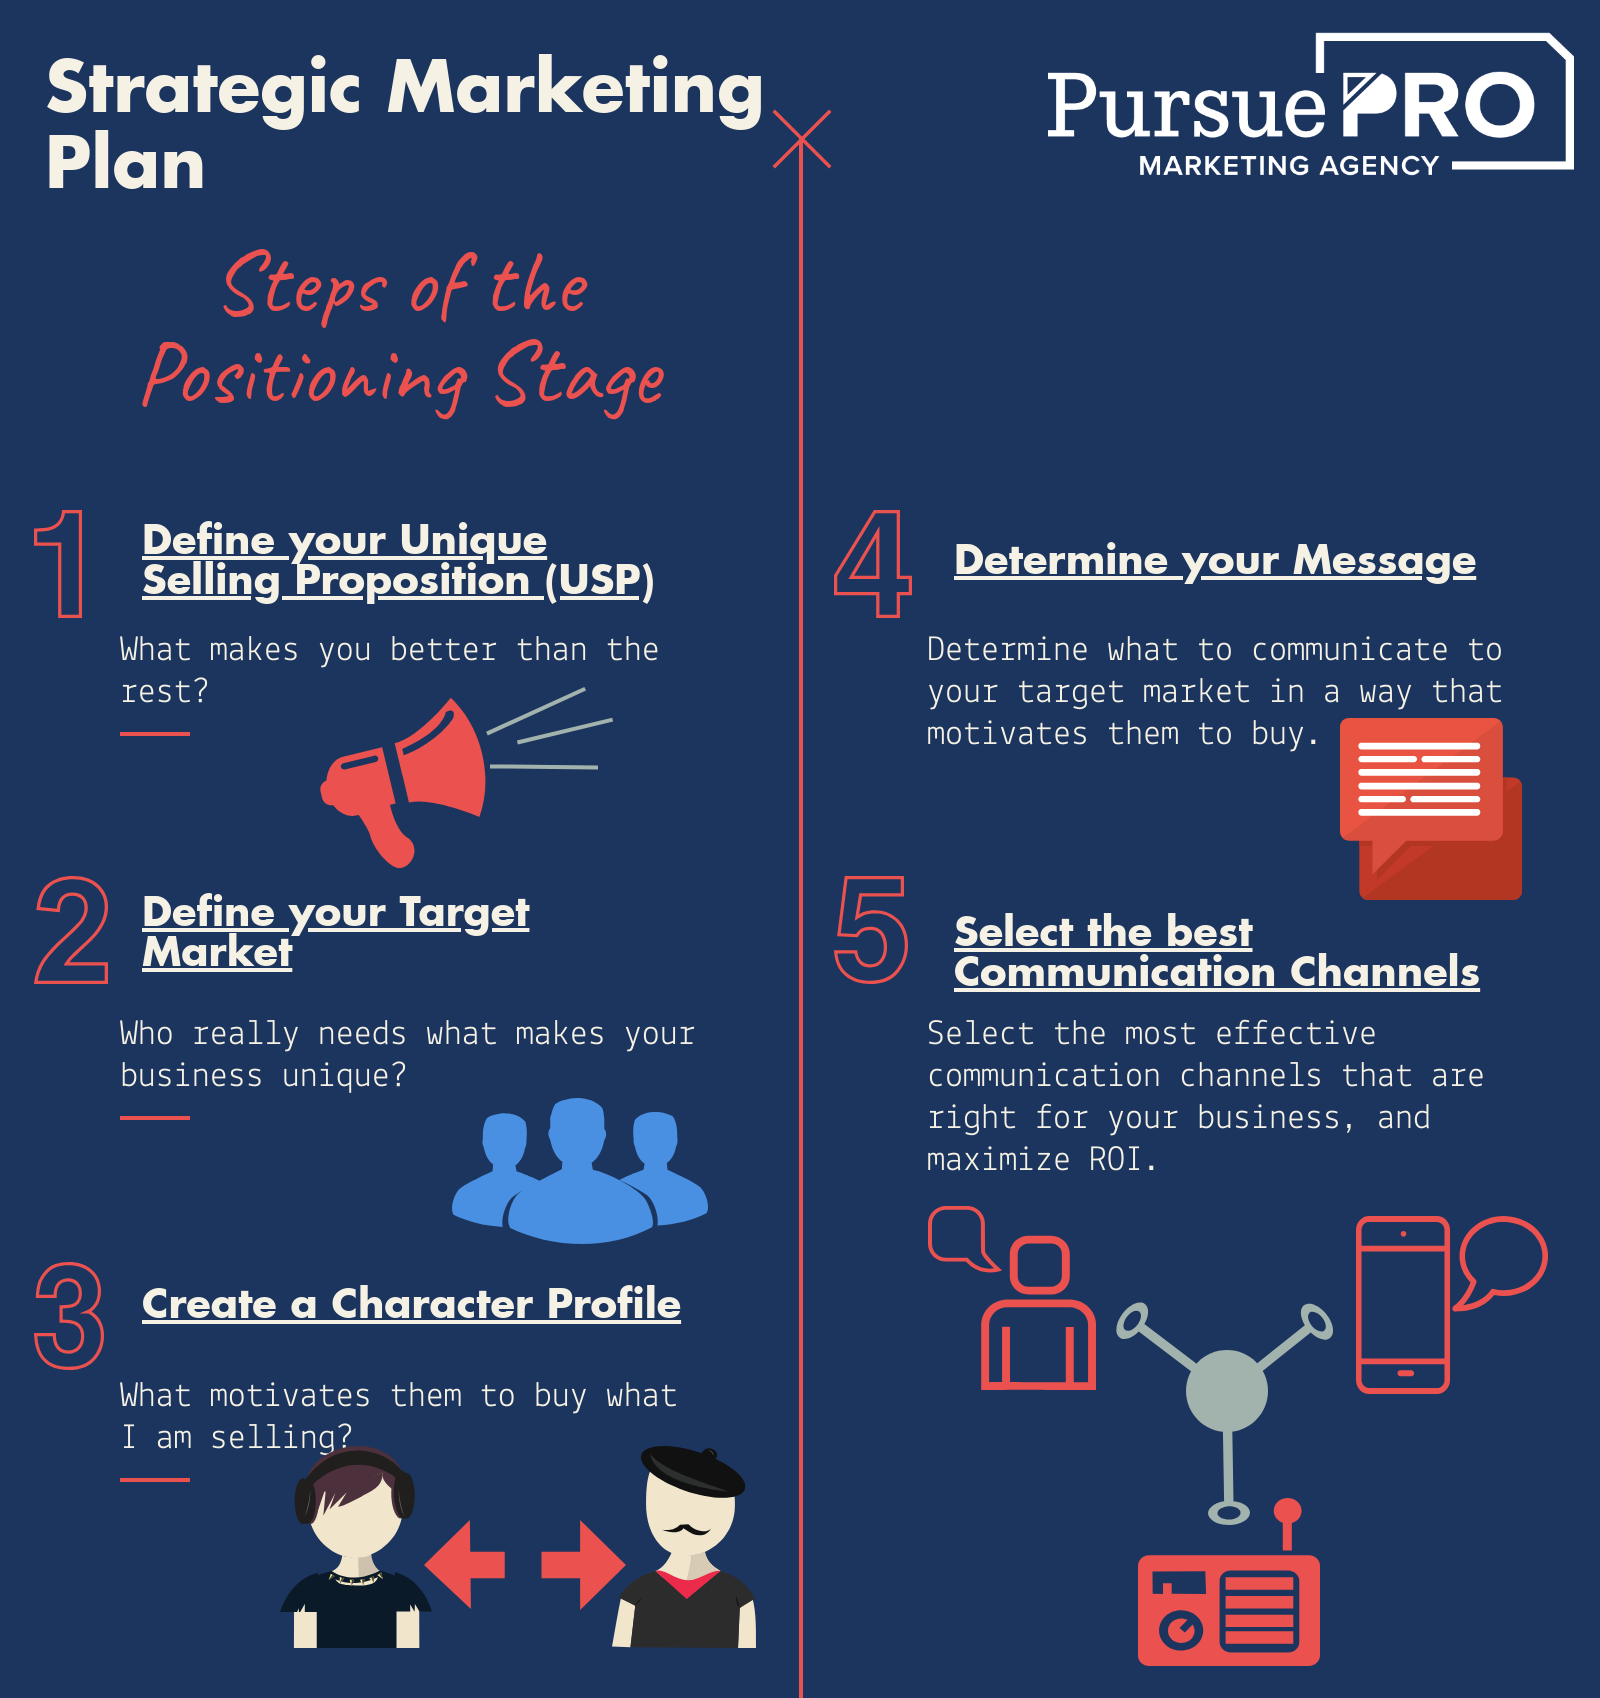 Strategic Marketing Plan - The Positioning Stage Infographic